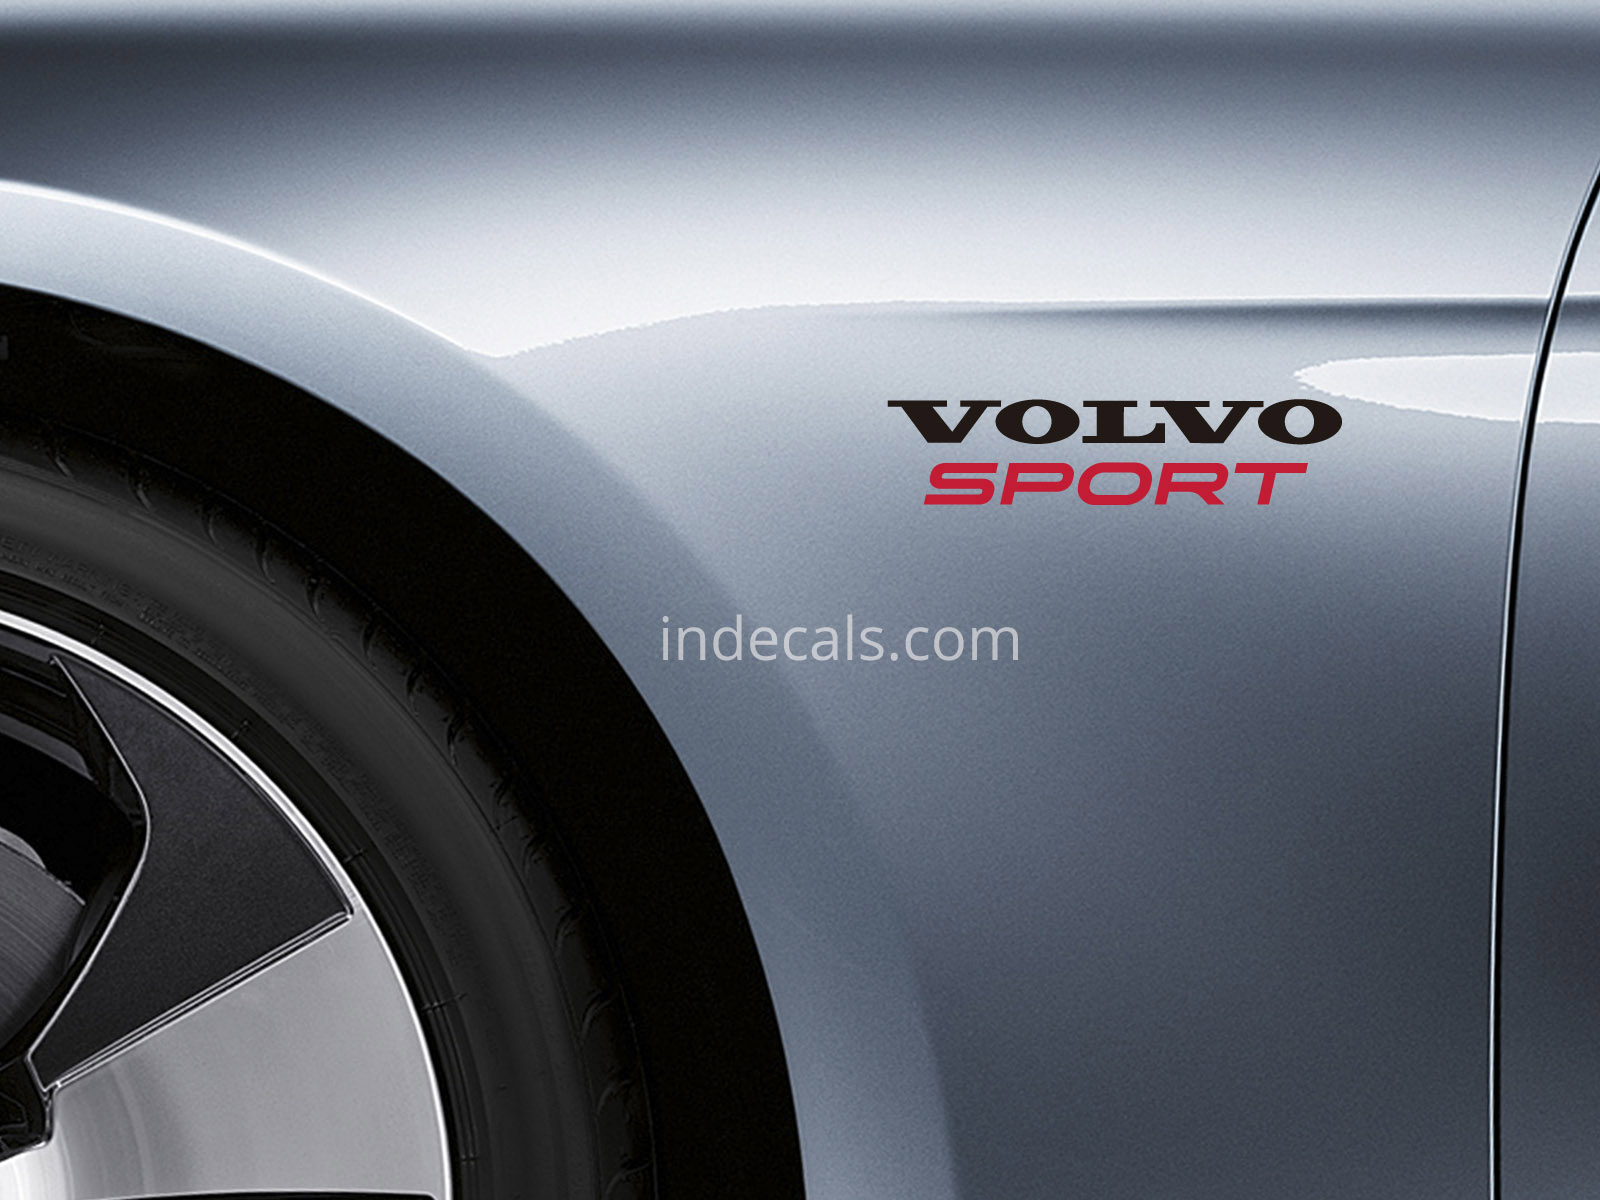 2 x Volvo Sports stickers for Wings - Black & Red